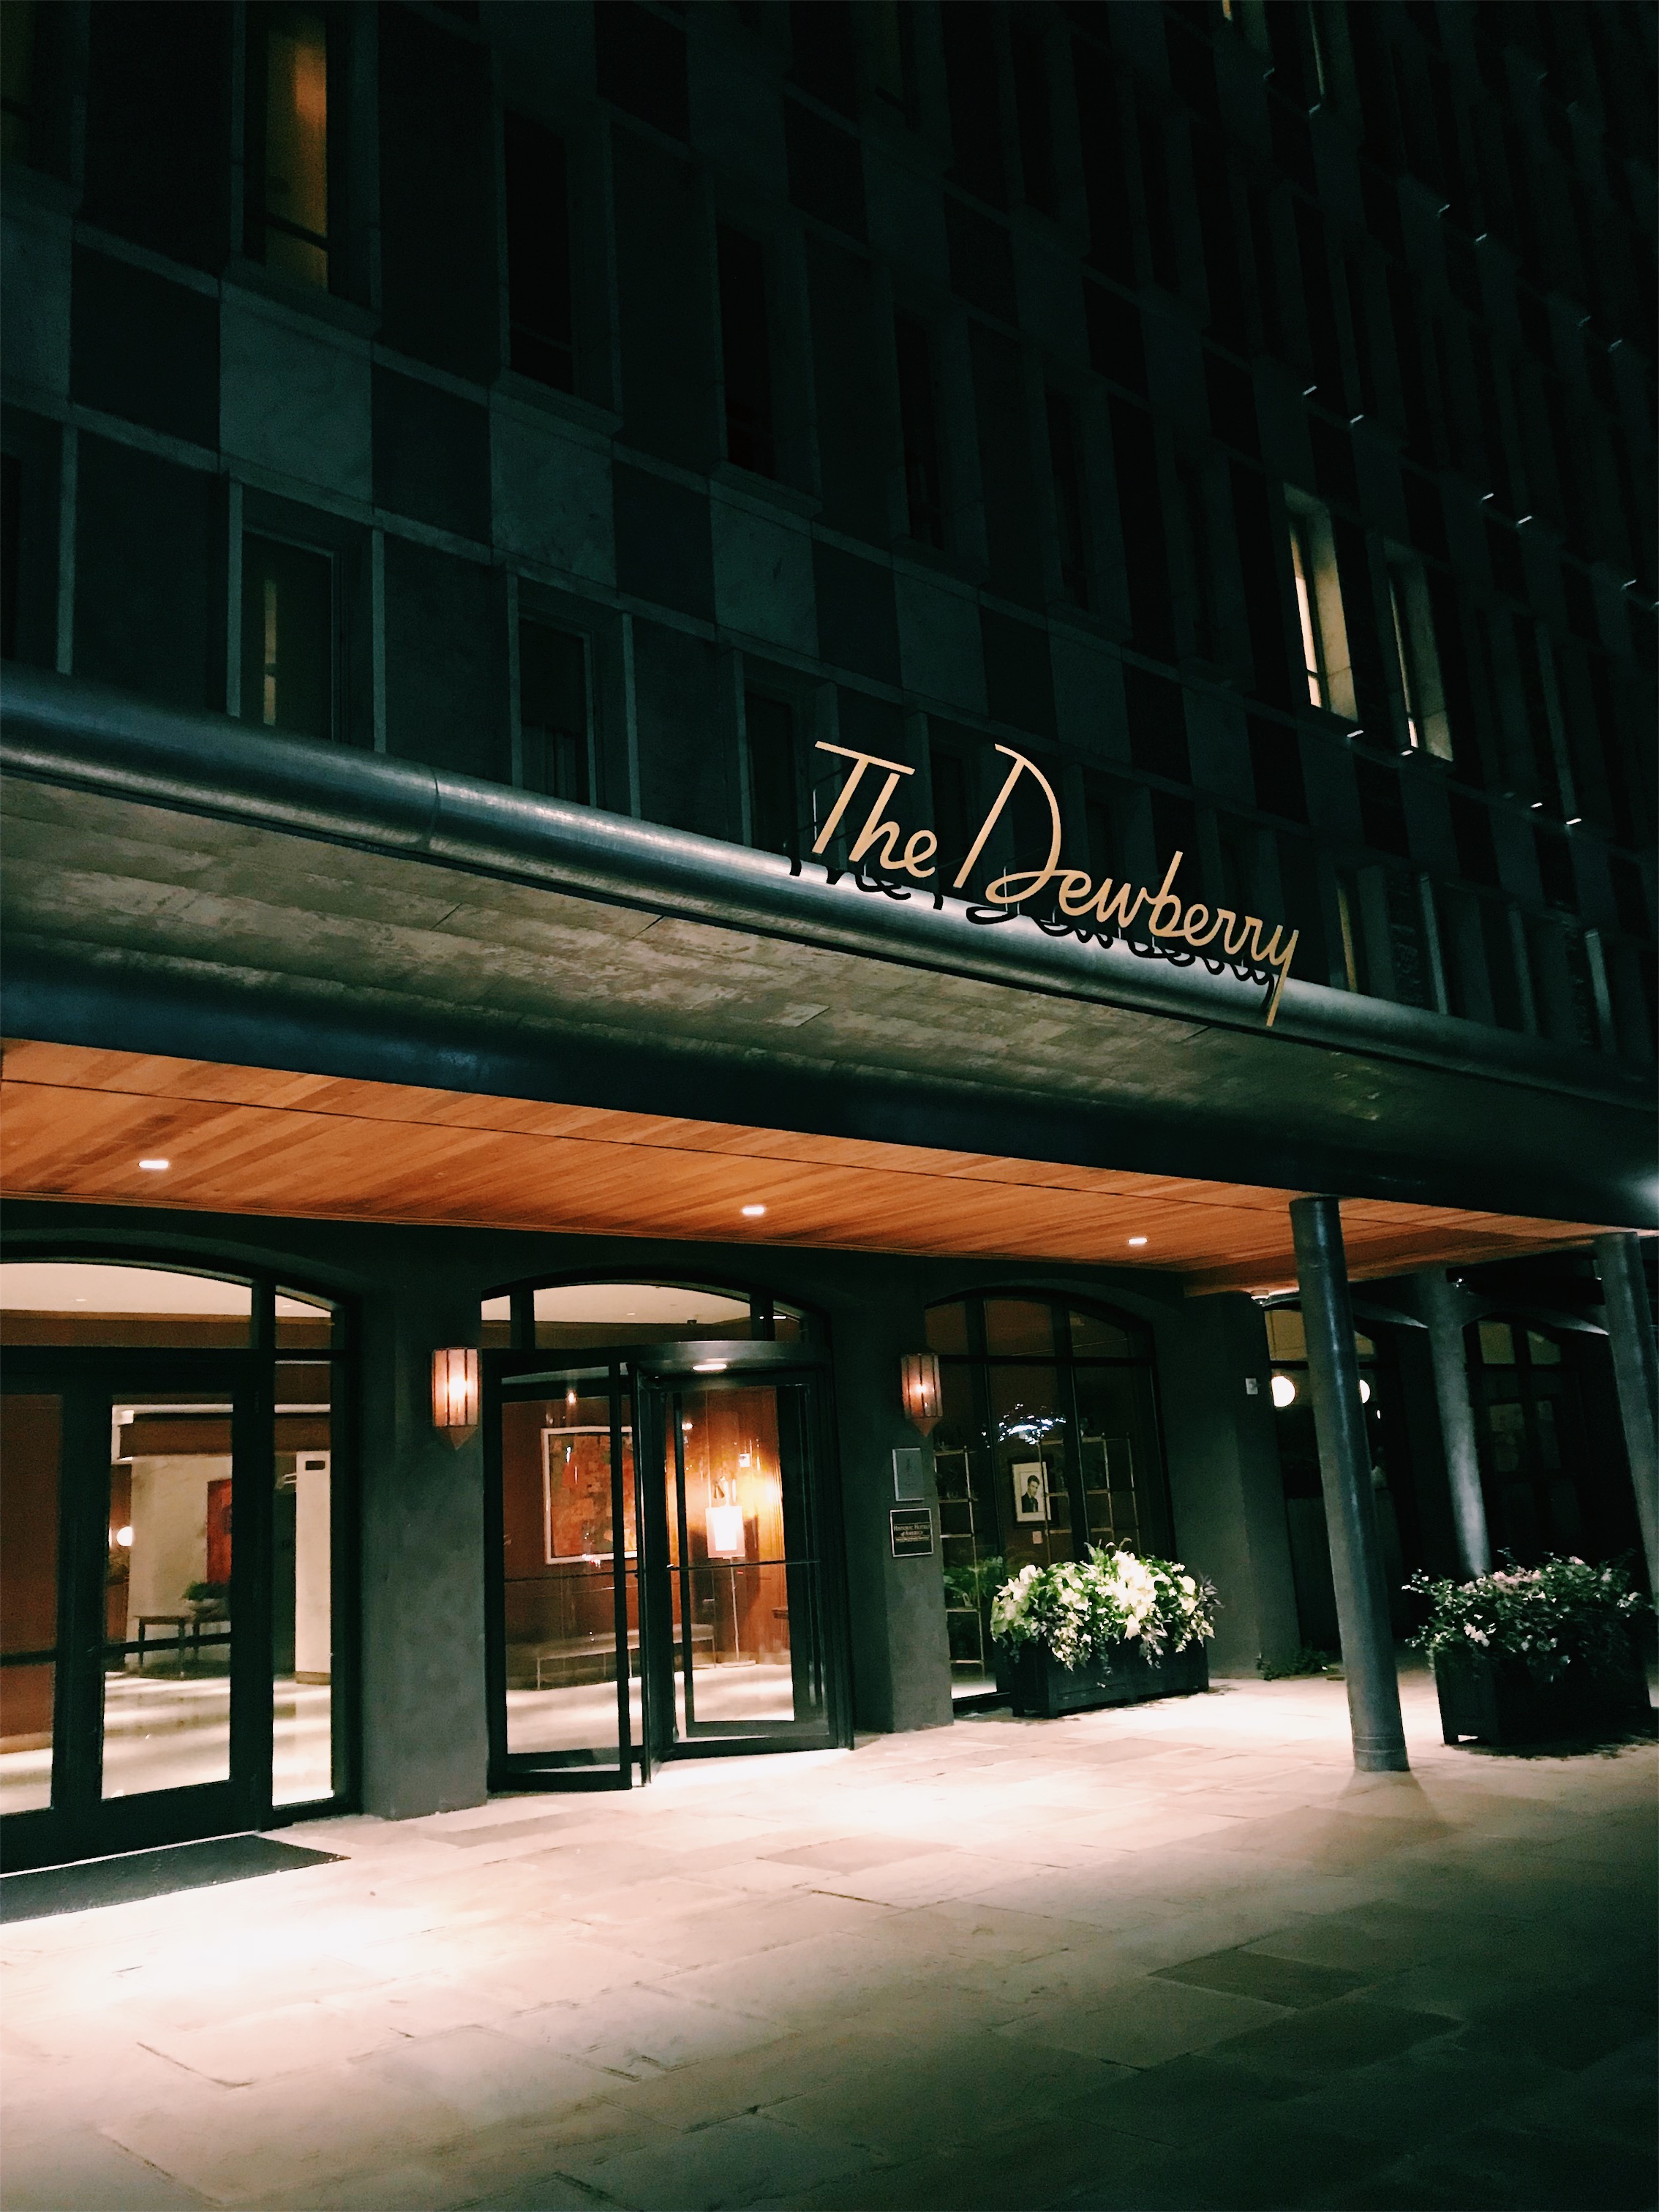 The Dewberry Hotel at night